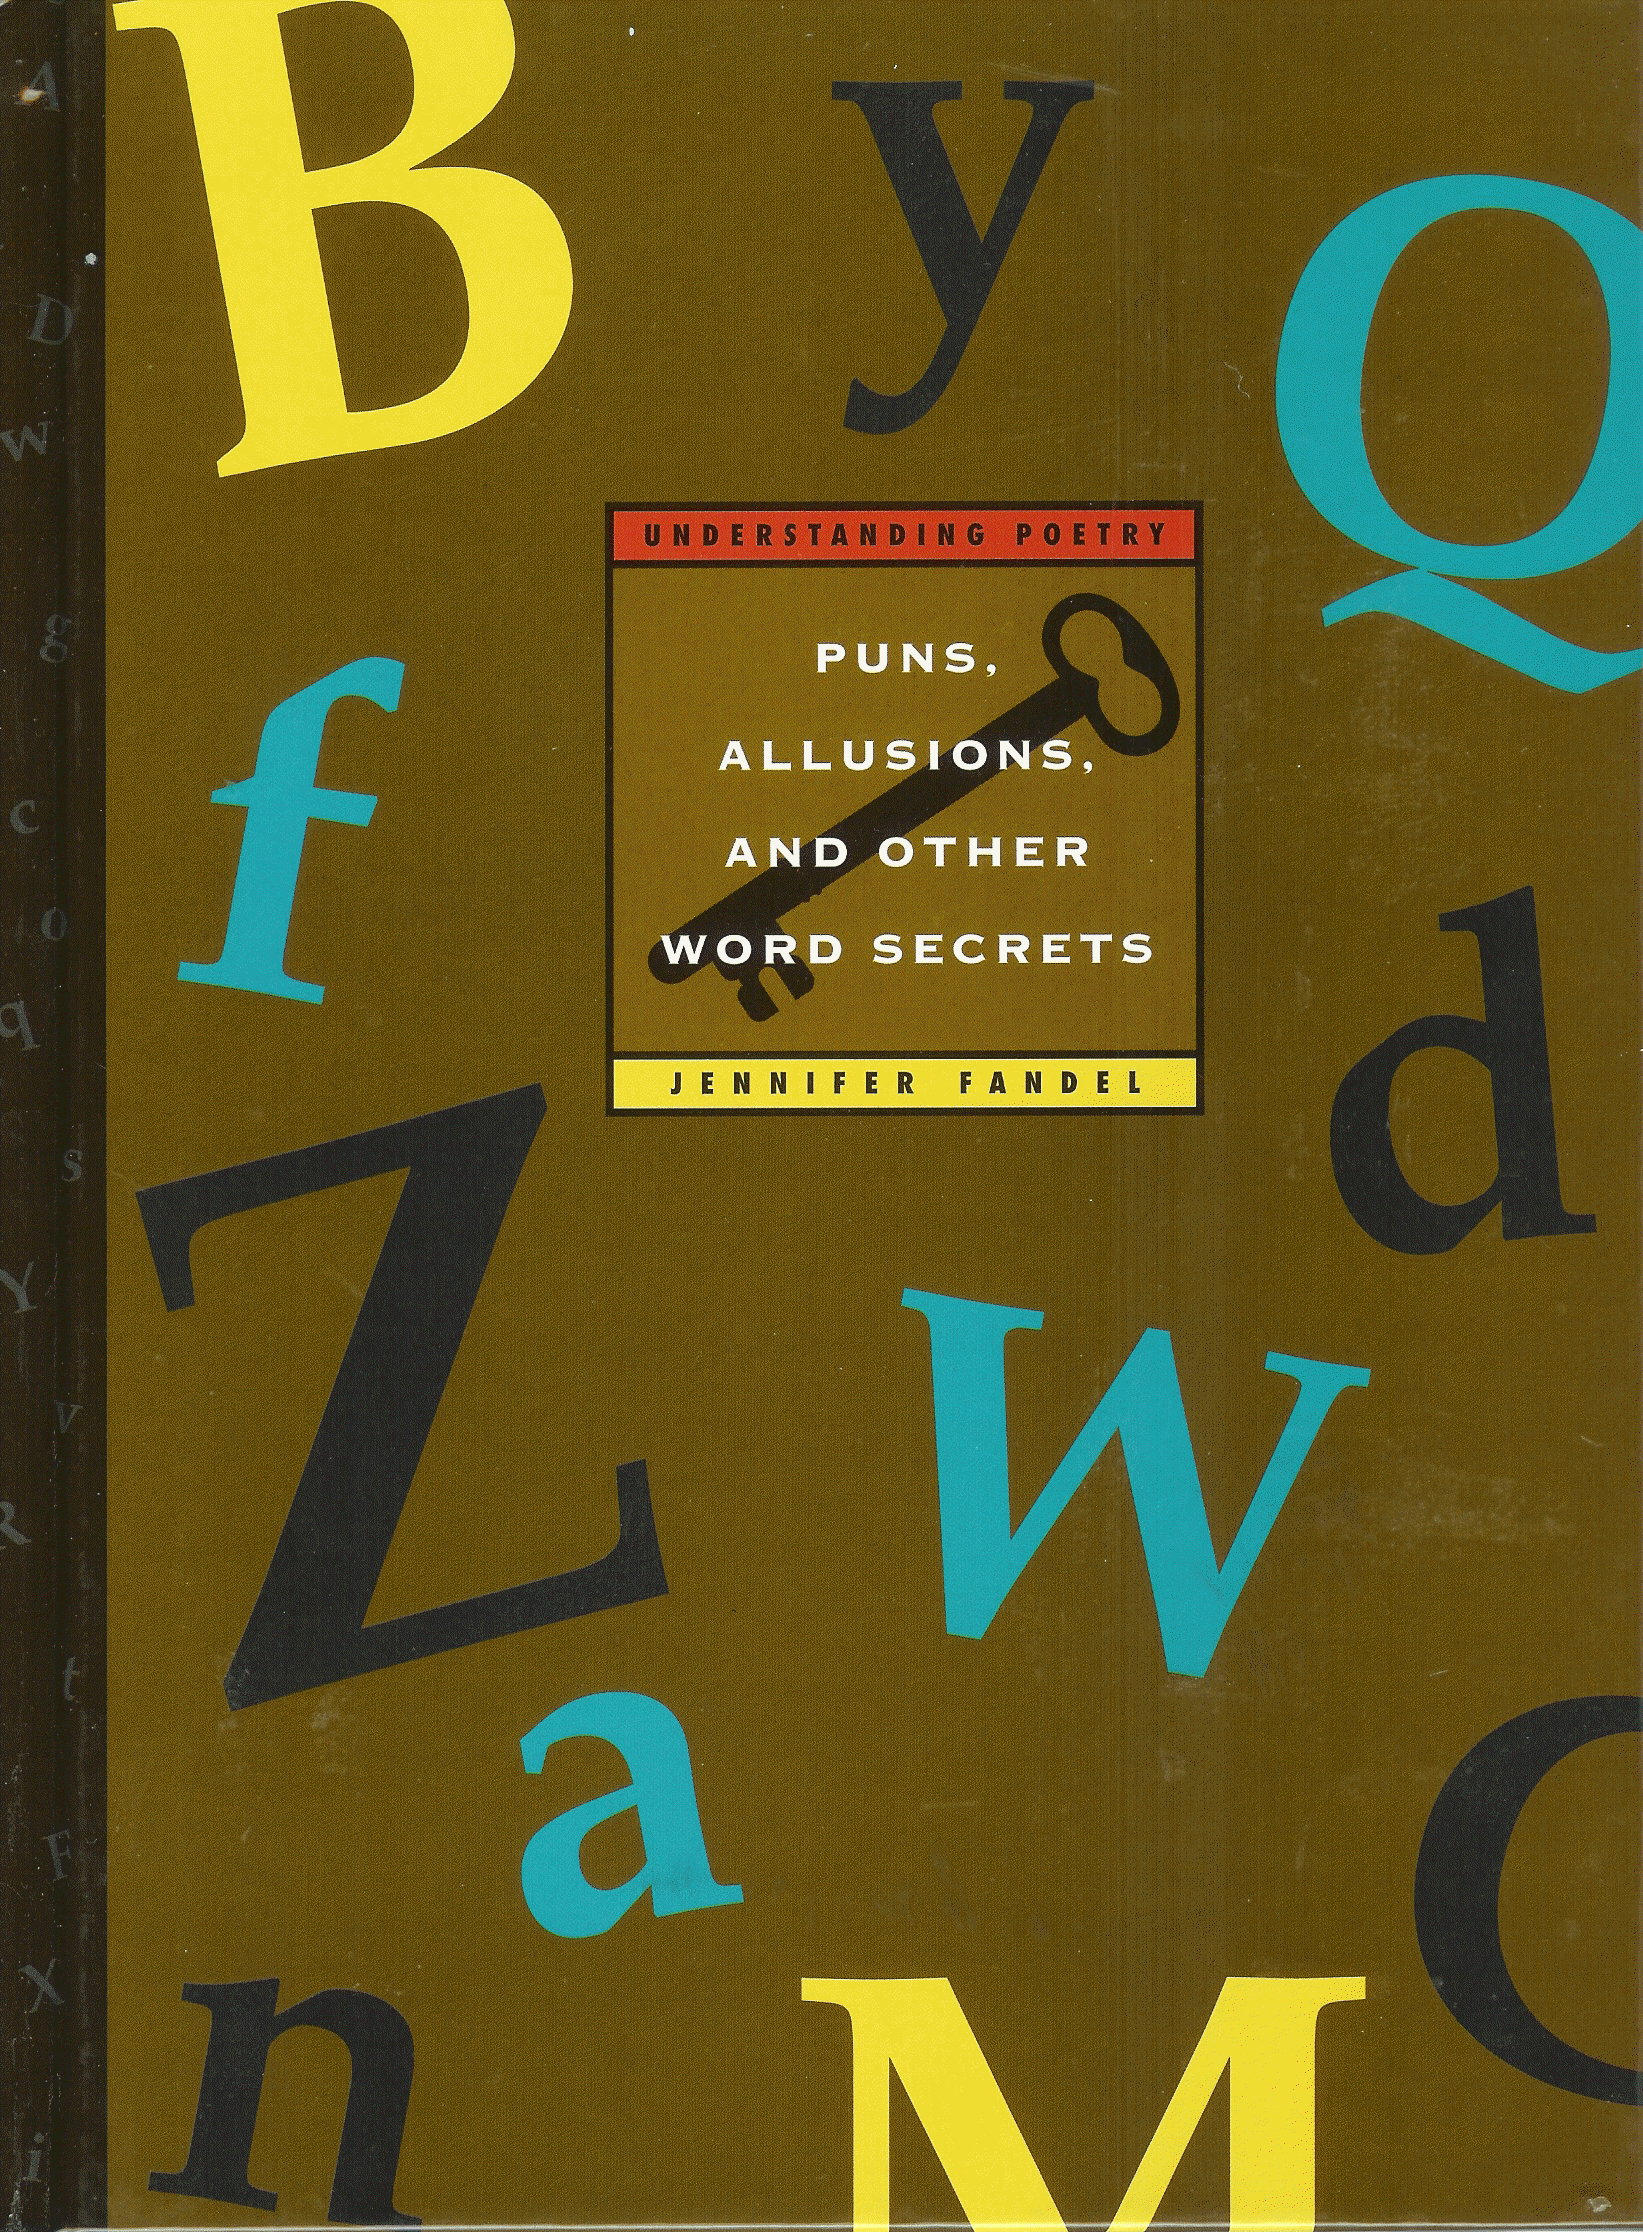 Puns Allusions and other word secrets